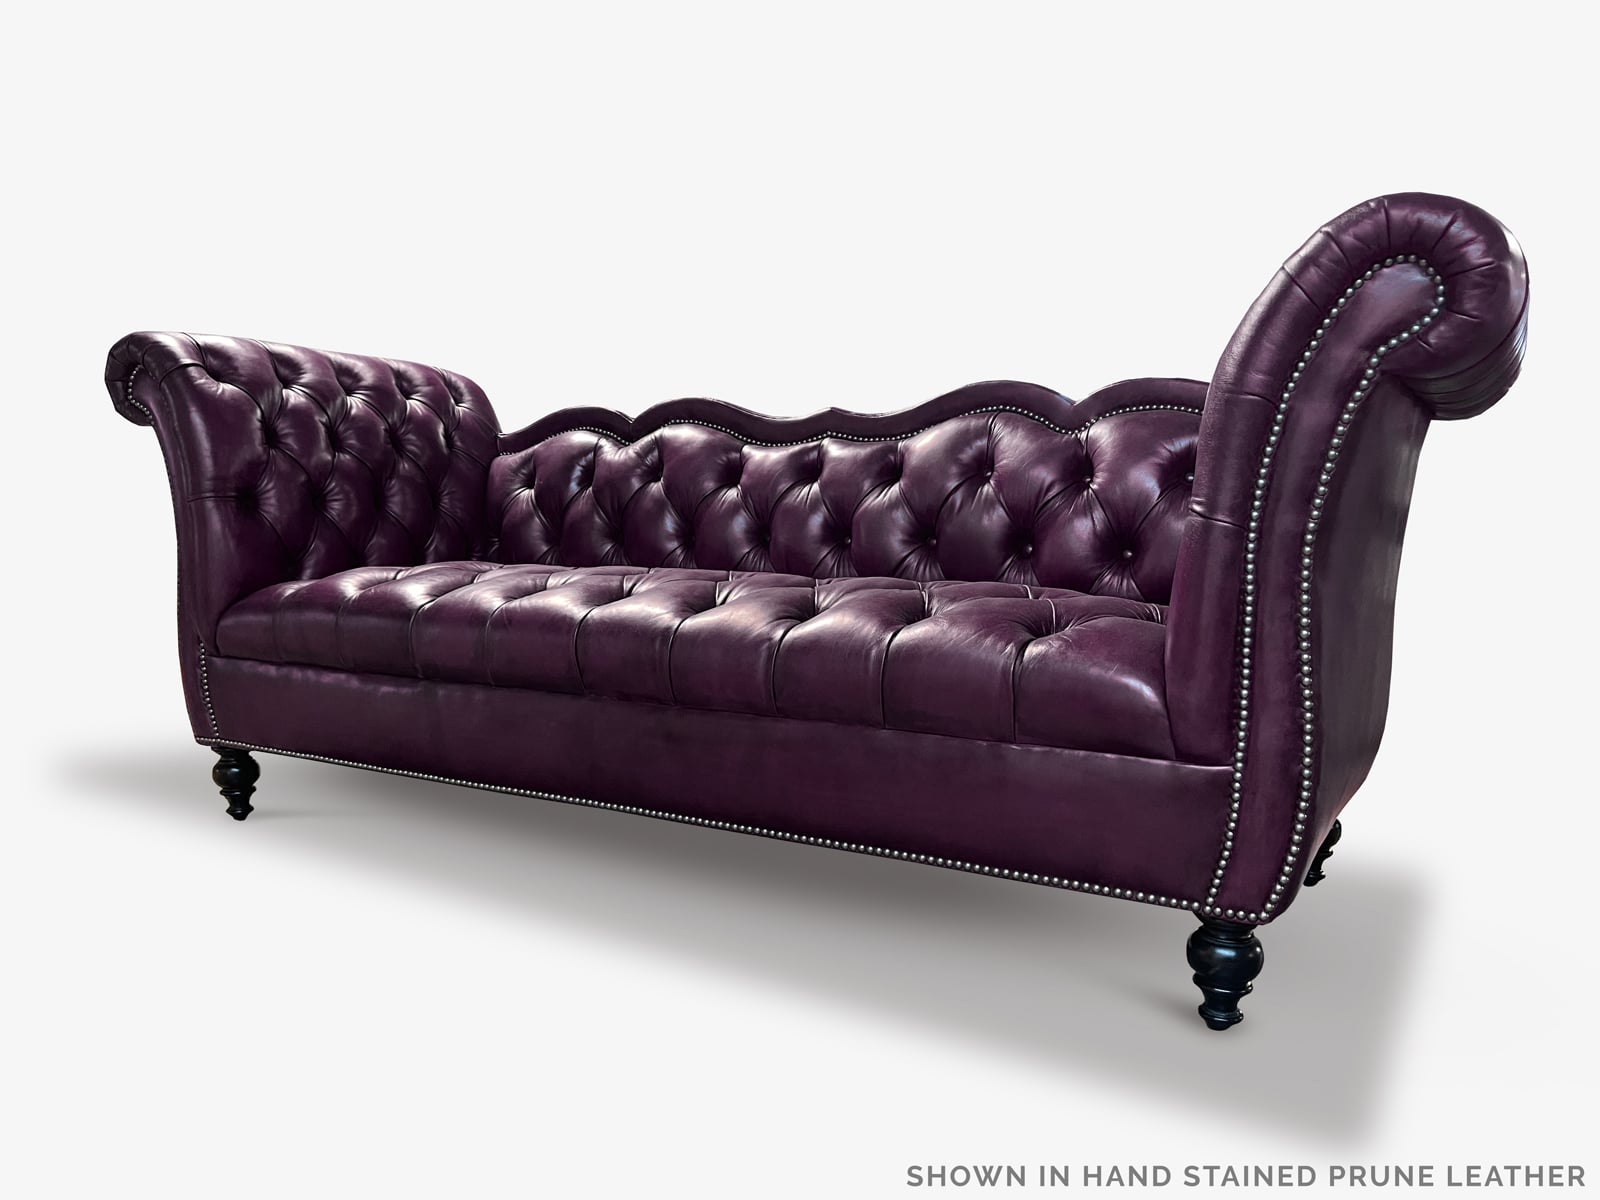 The Collins Custom Built Vintage Hand-Stained Prune Chesterfield Sofa